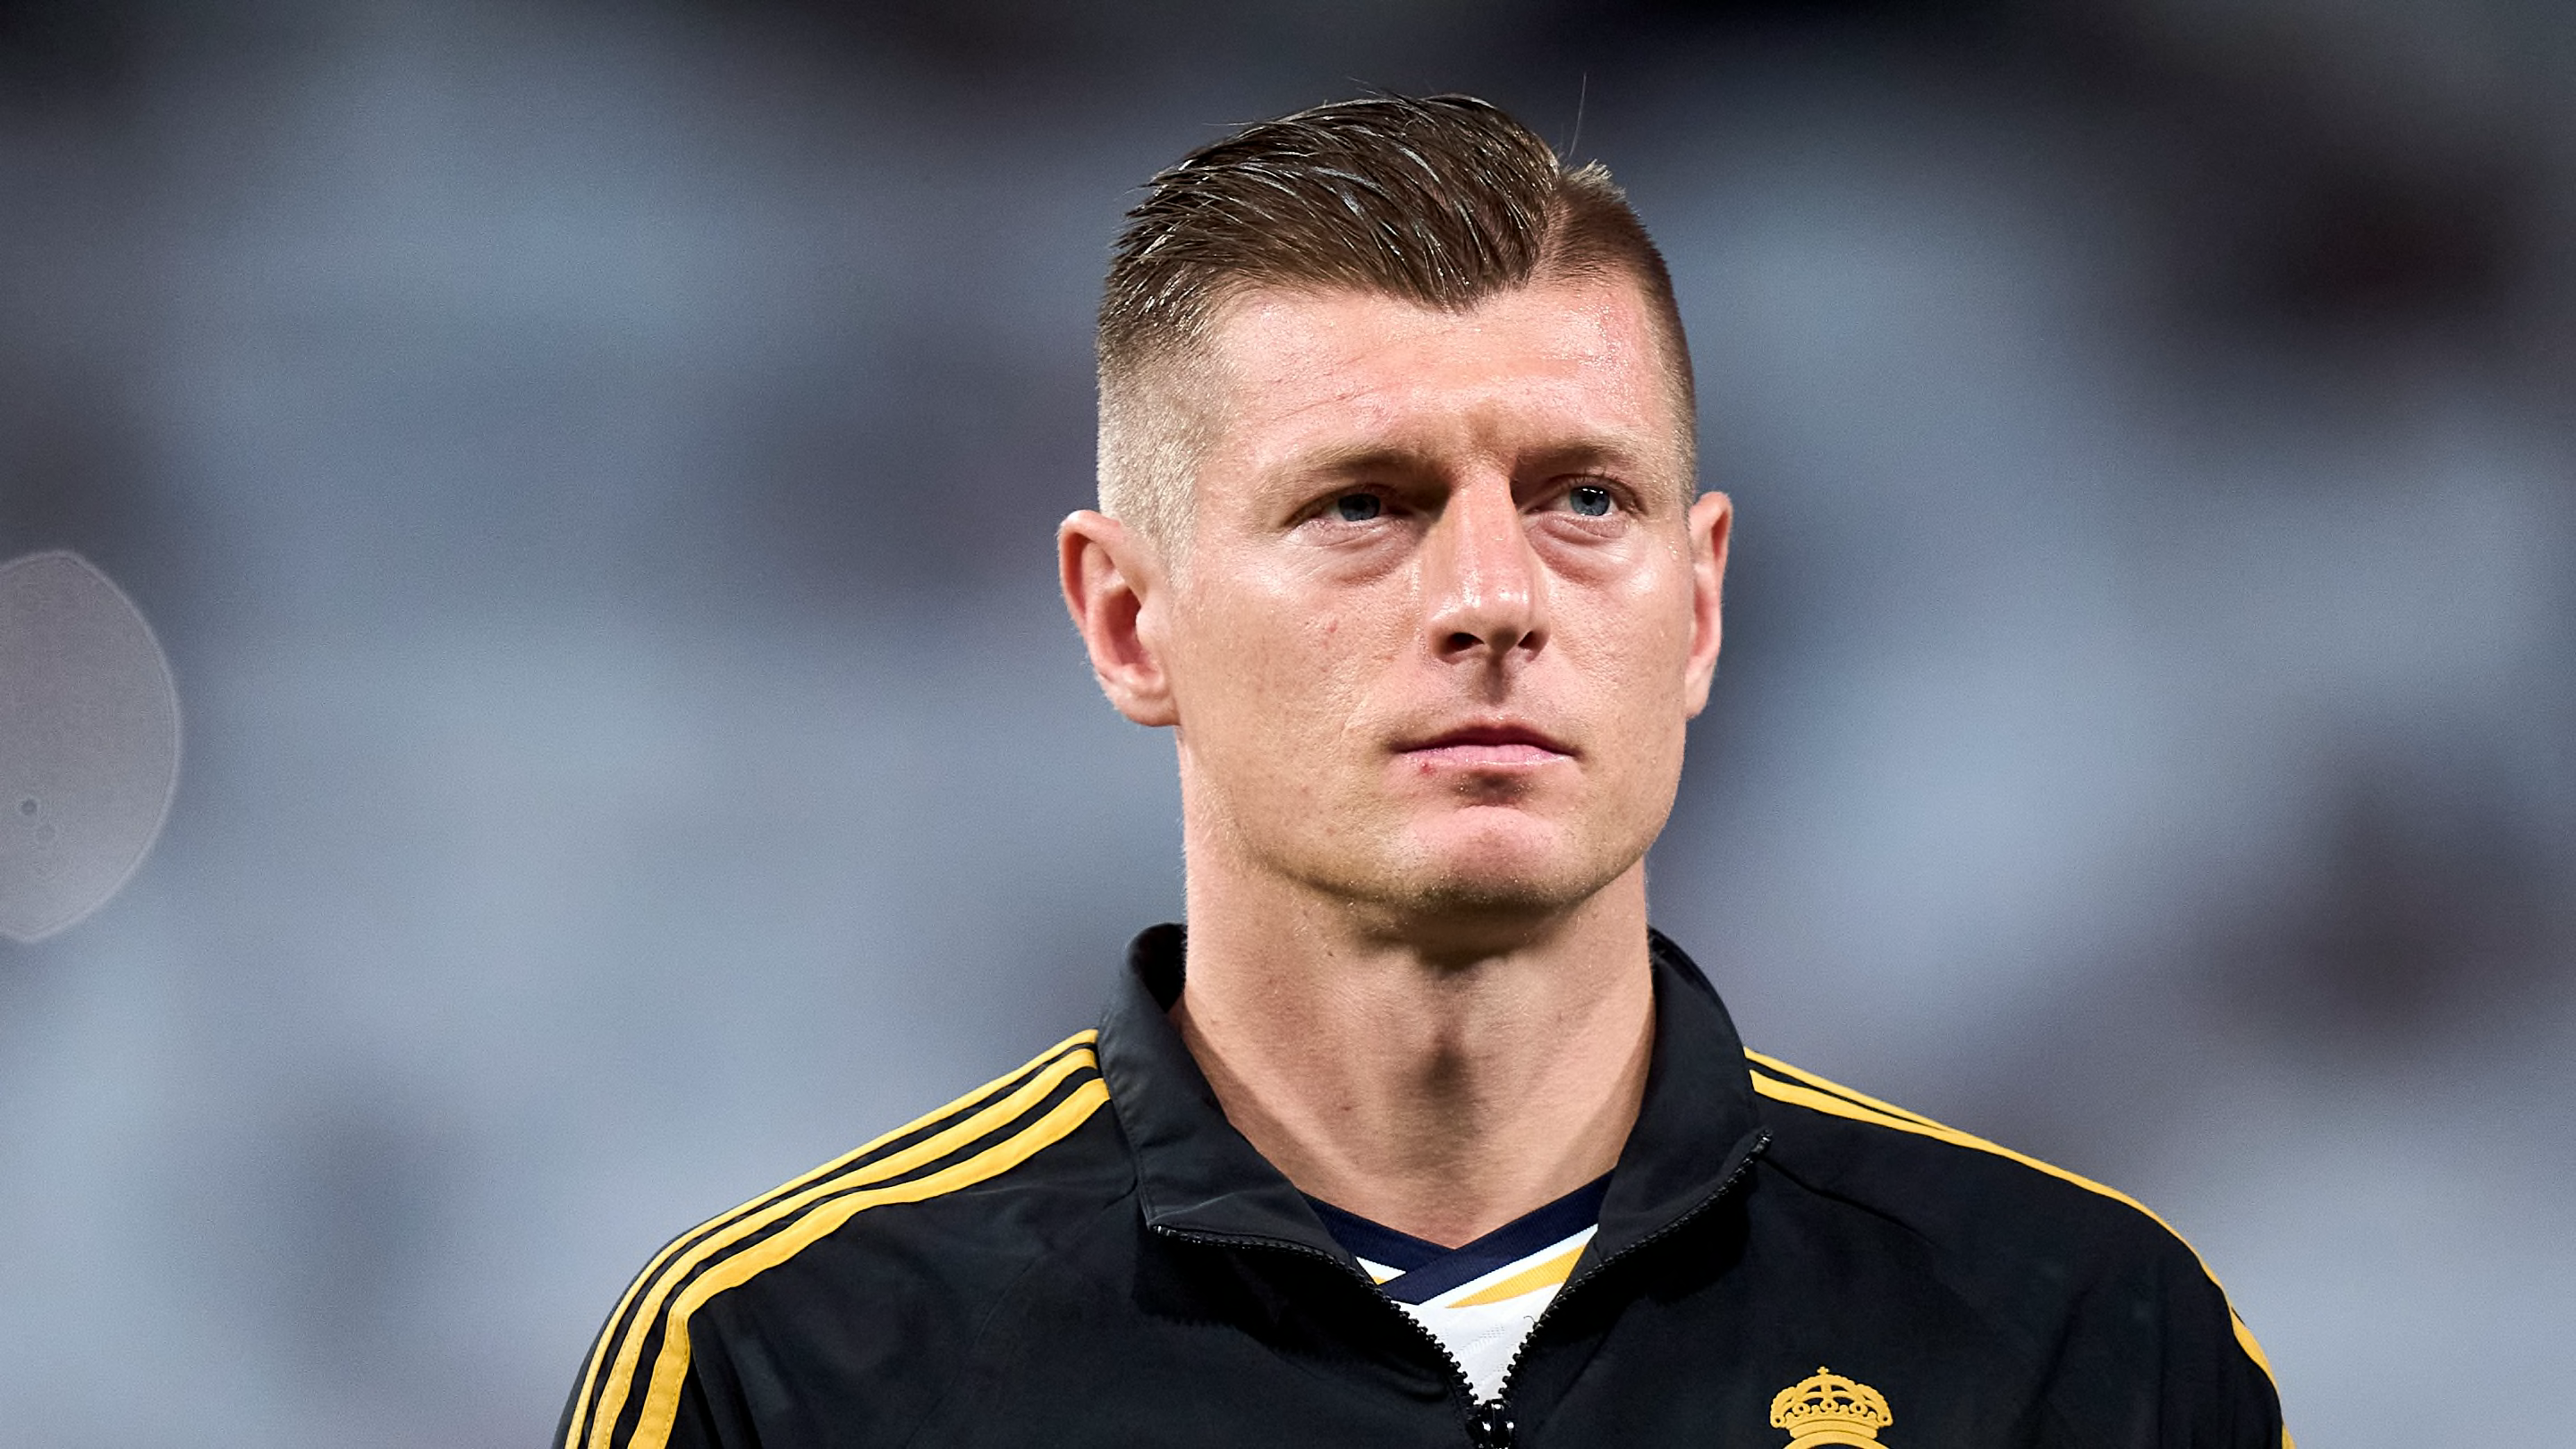 Toni Kroos will retire after Euro 2024